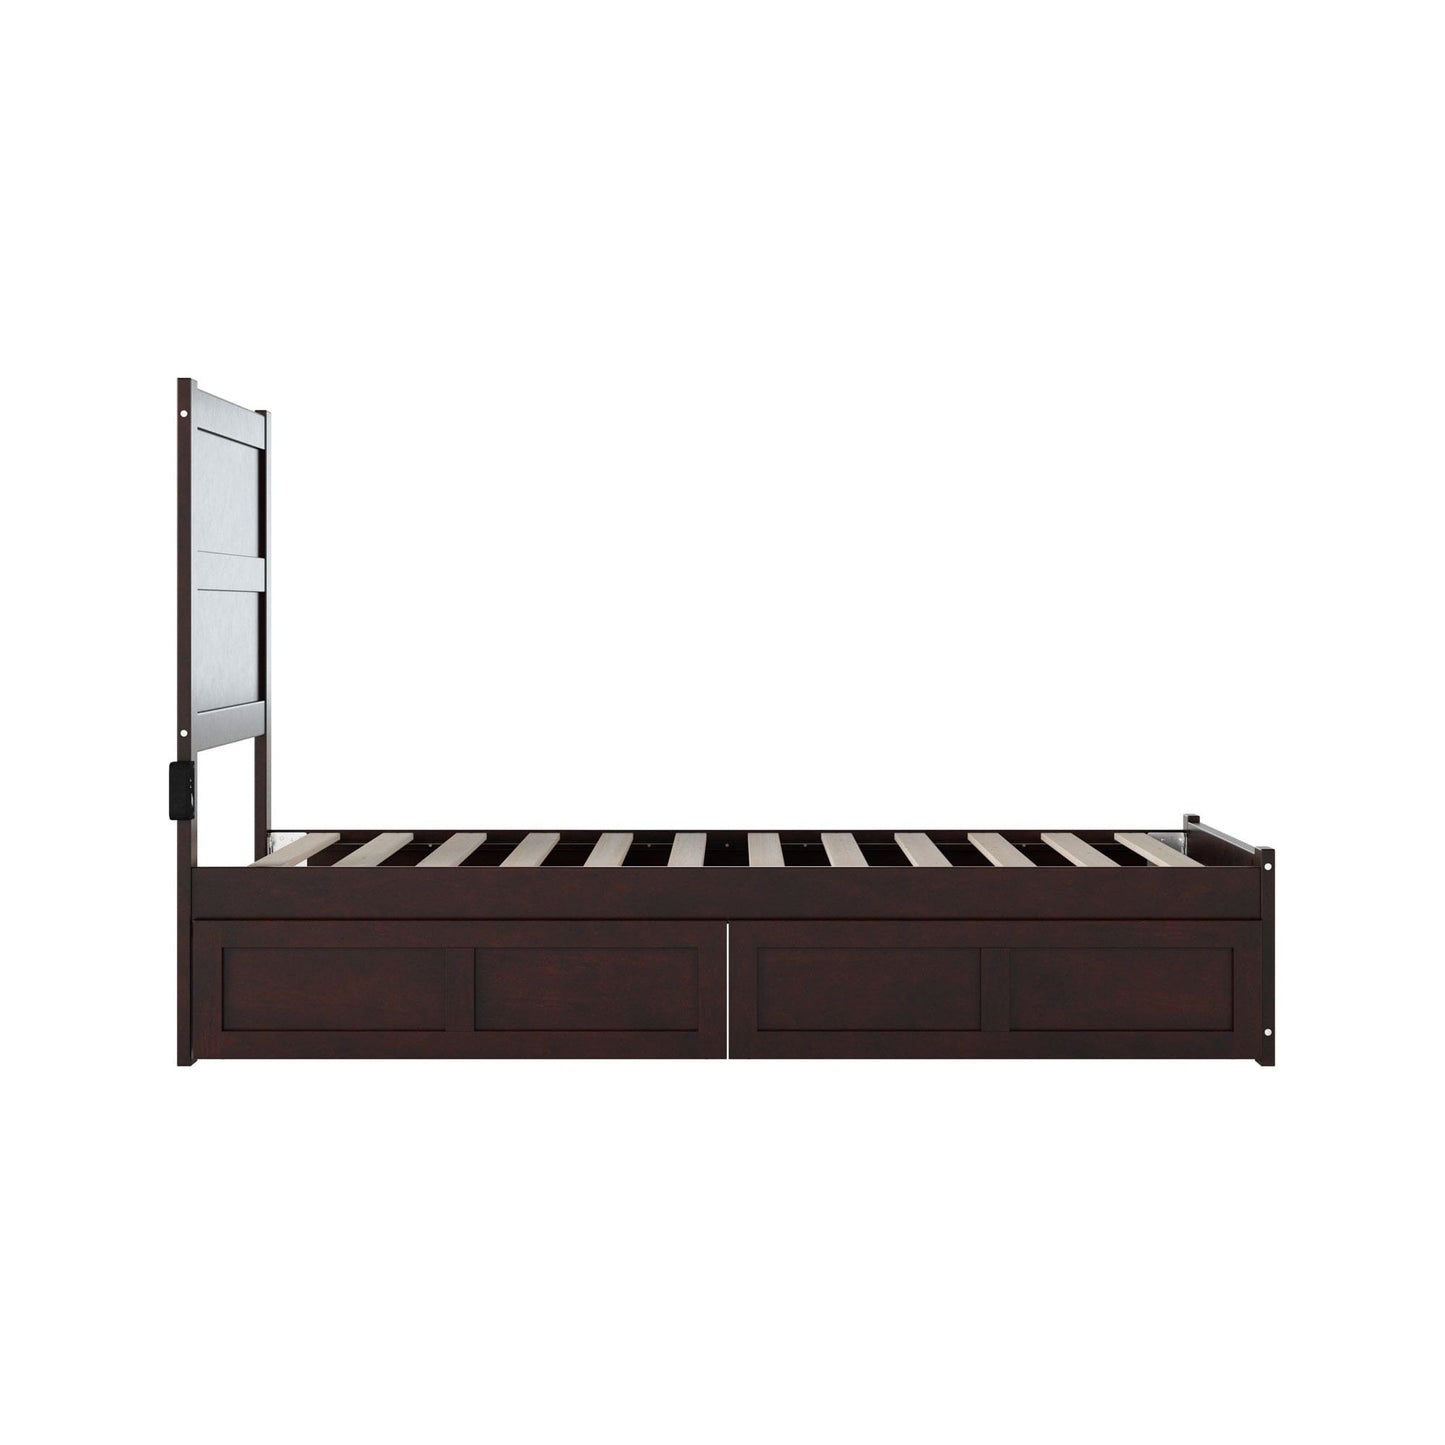 AFI Furnishings NoHo Twin Bed with Footboard and 2 Drawers in Espresso AG9163321